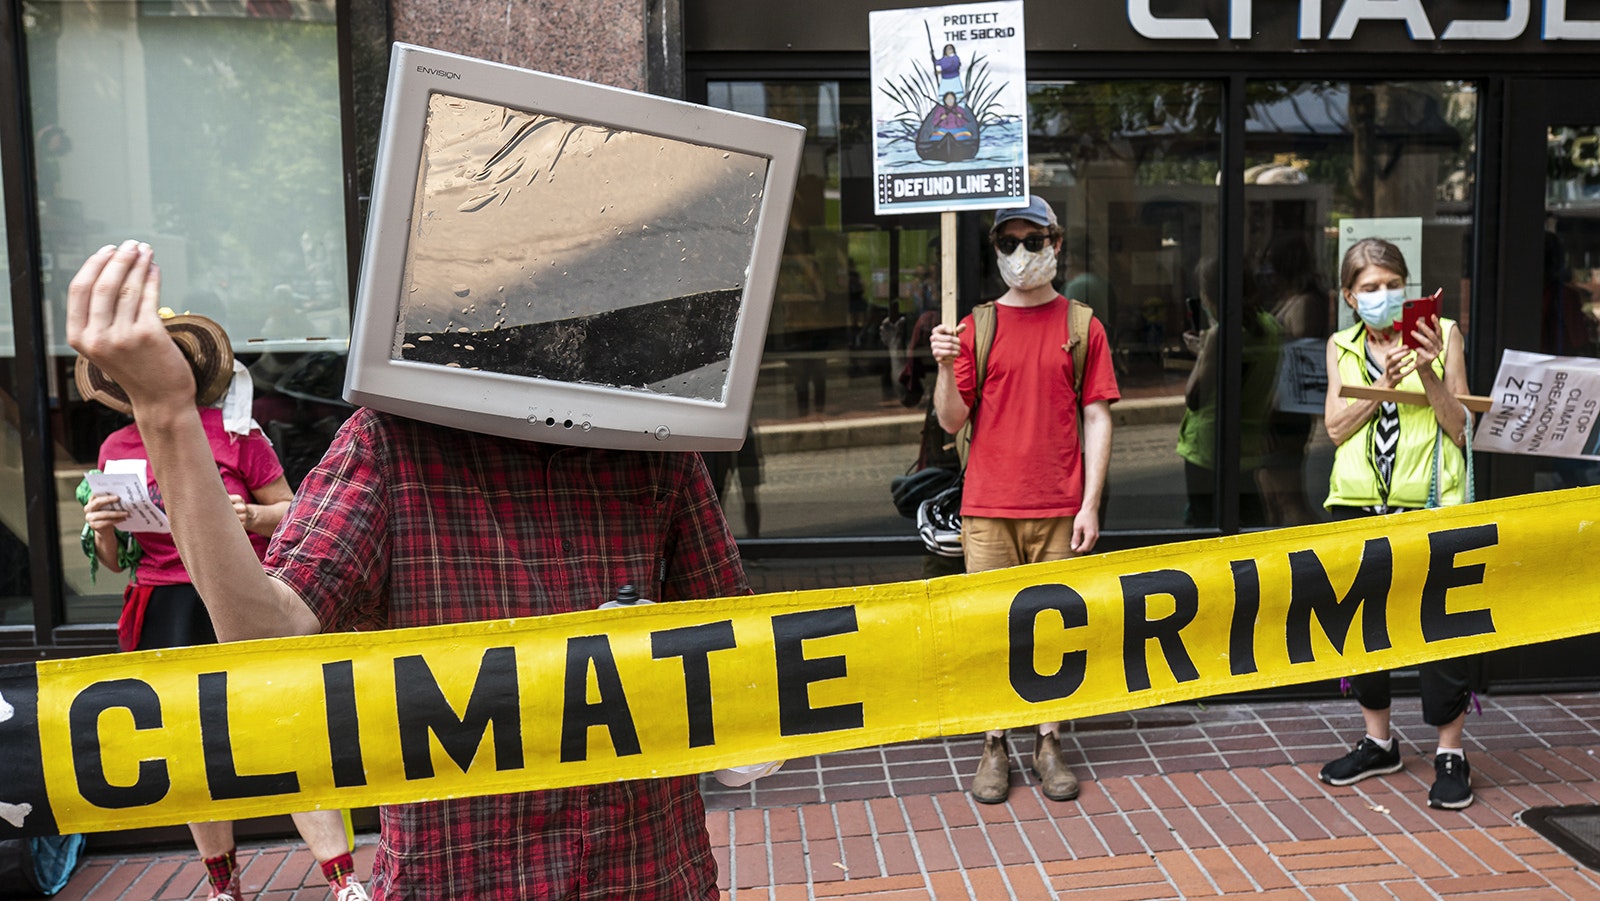 Climate Change protesters hold a rally during an extreme heatwave on Aug. 13, 2021, in Portland, Oregon. As temperatures climb across the nation, nearly 200 million Americans are under some level of heat advisory.